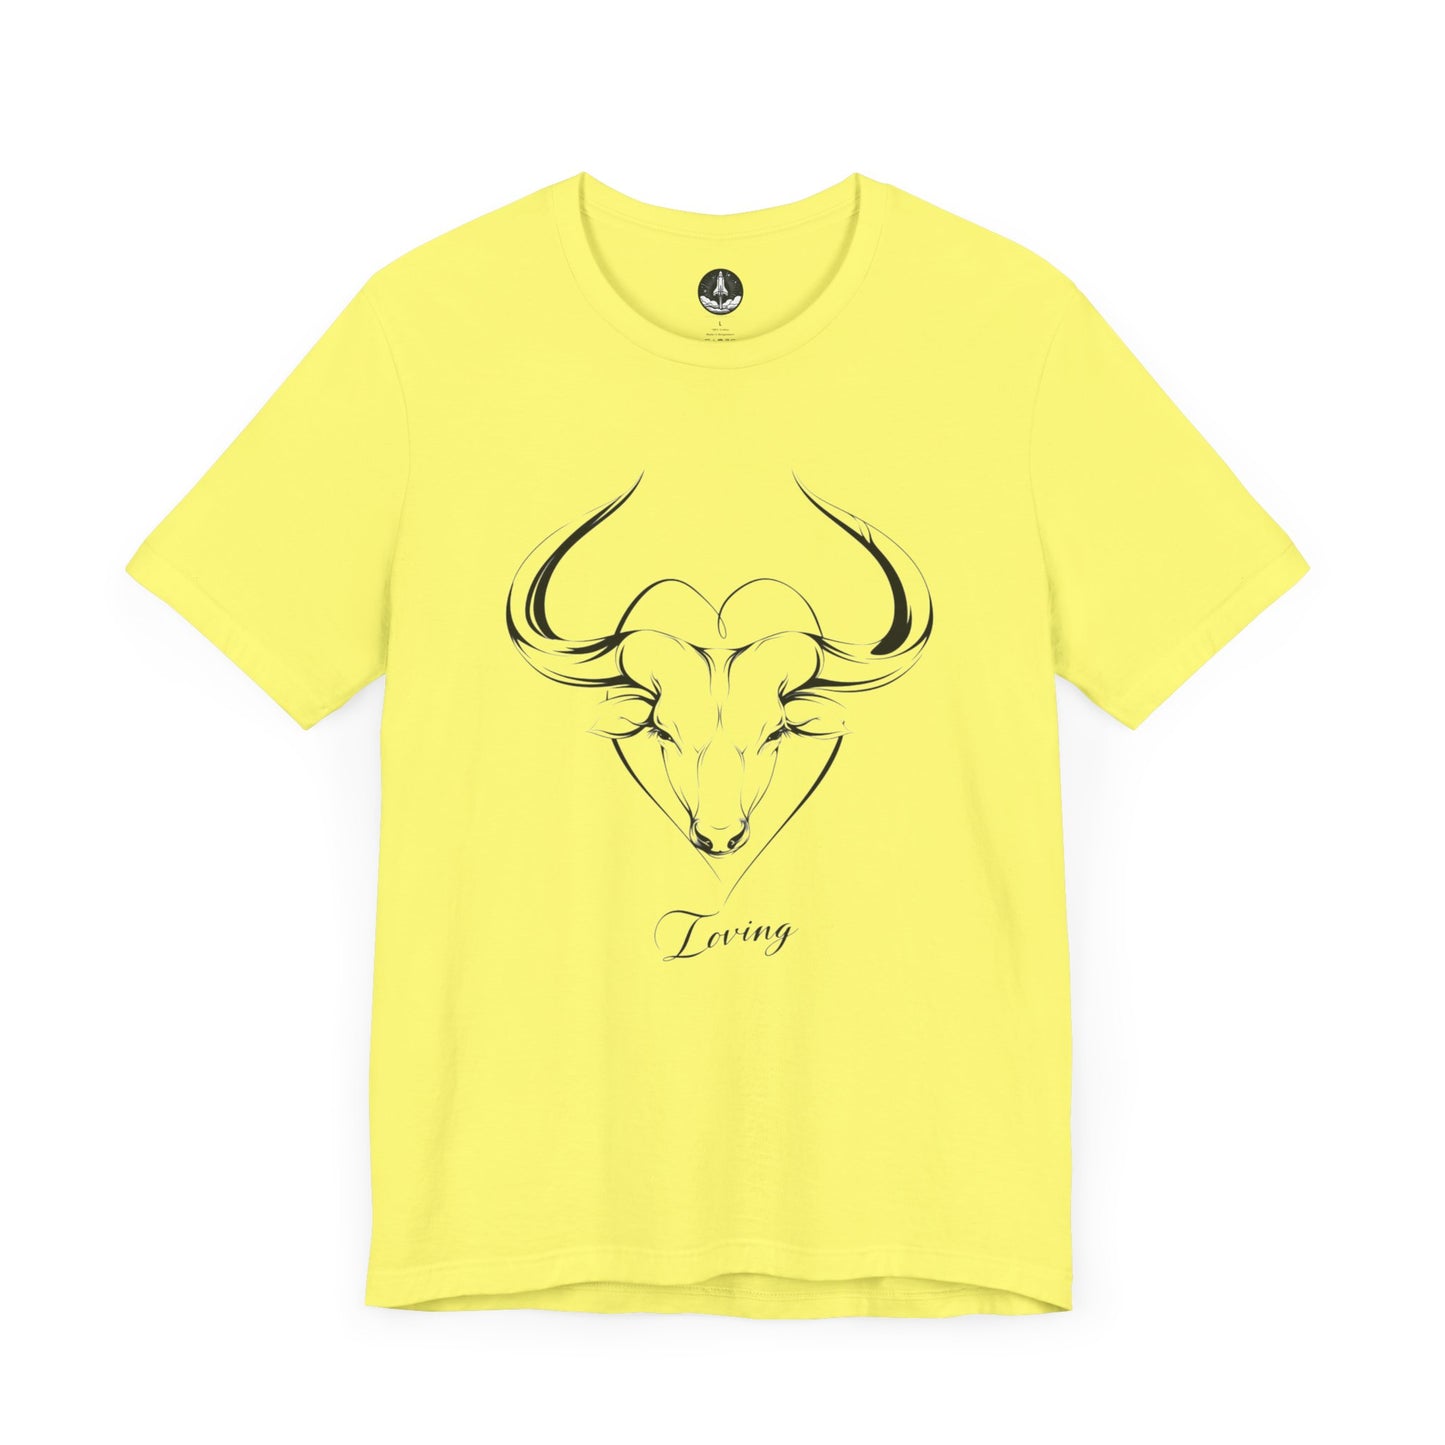 Embrace of Love: Taurus Connection T-Shirt